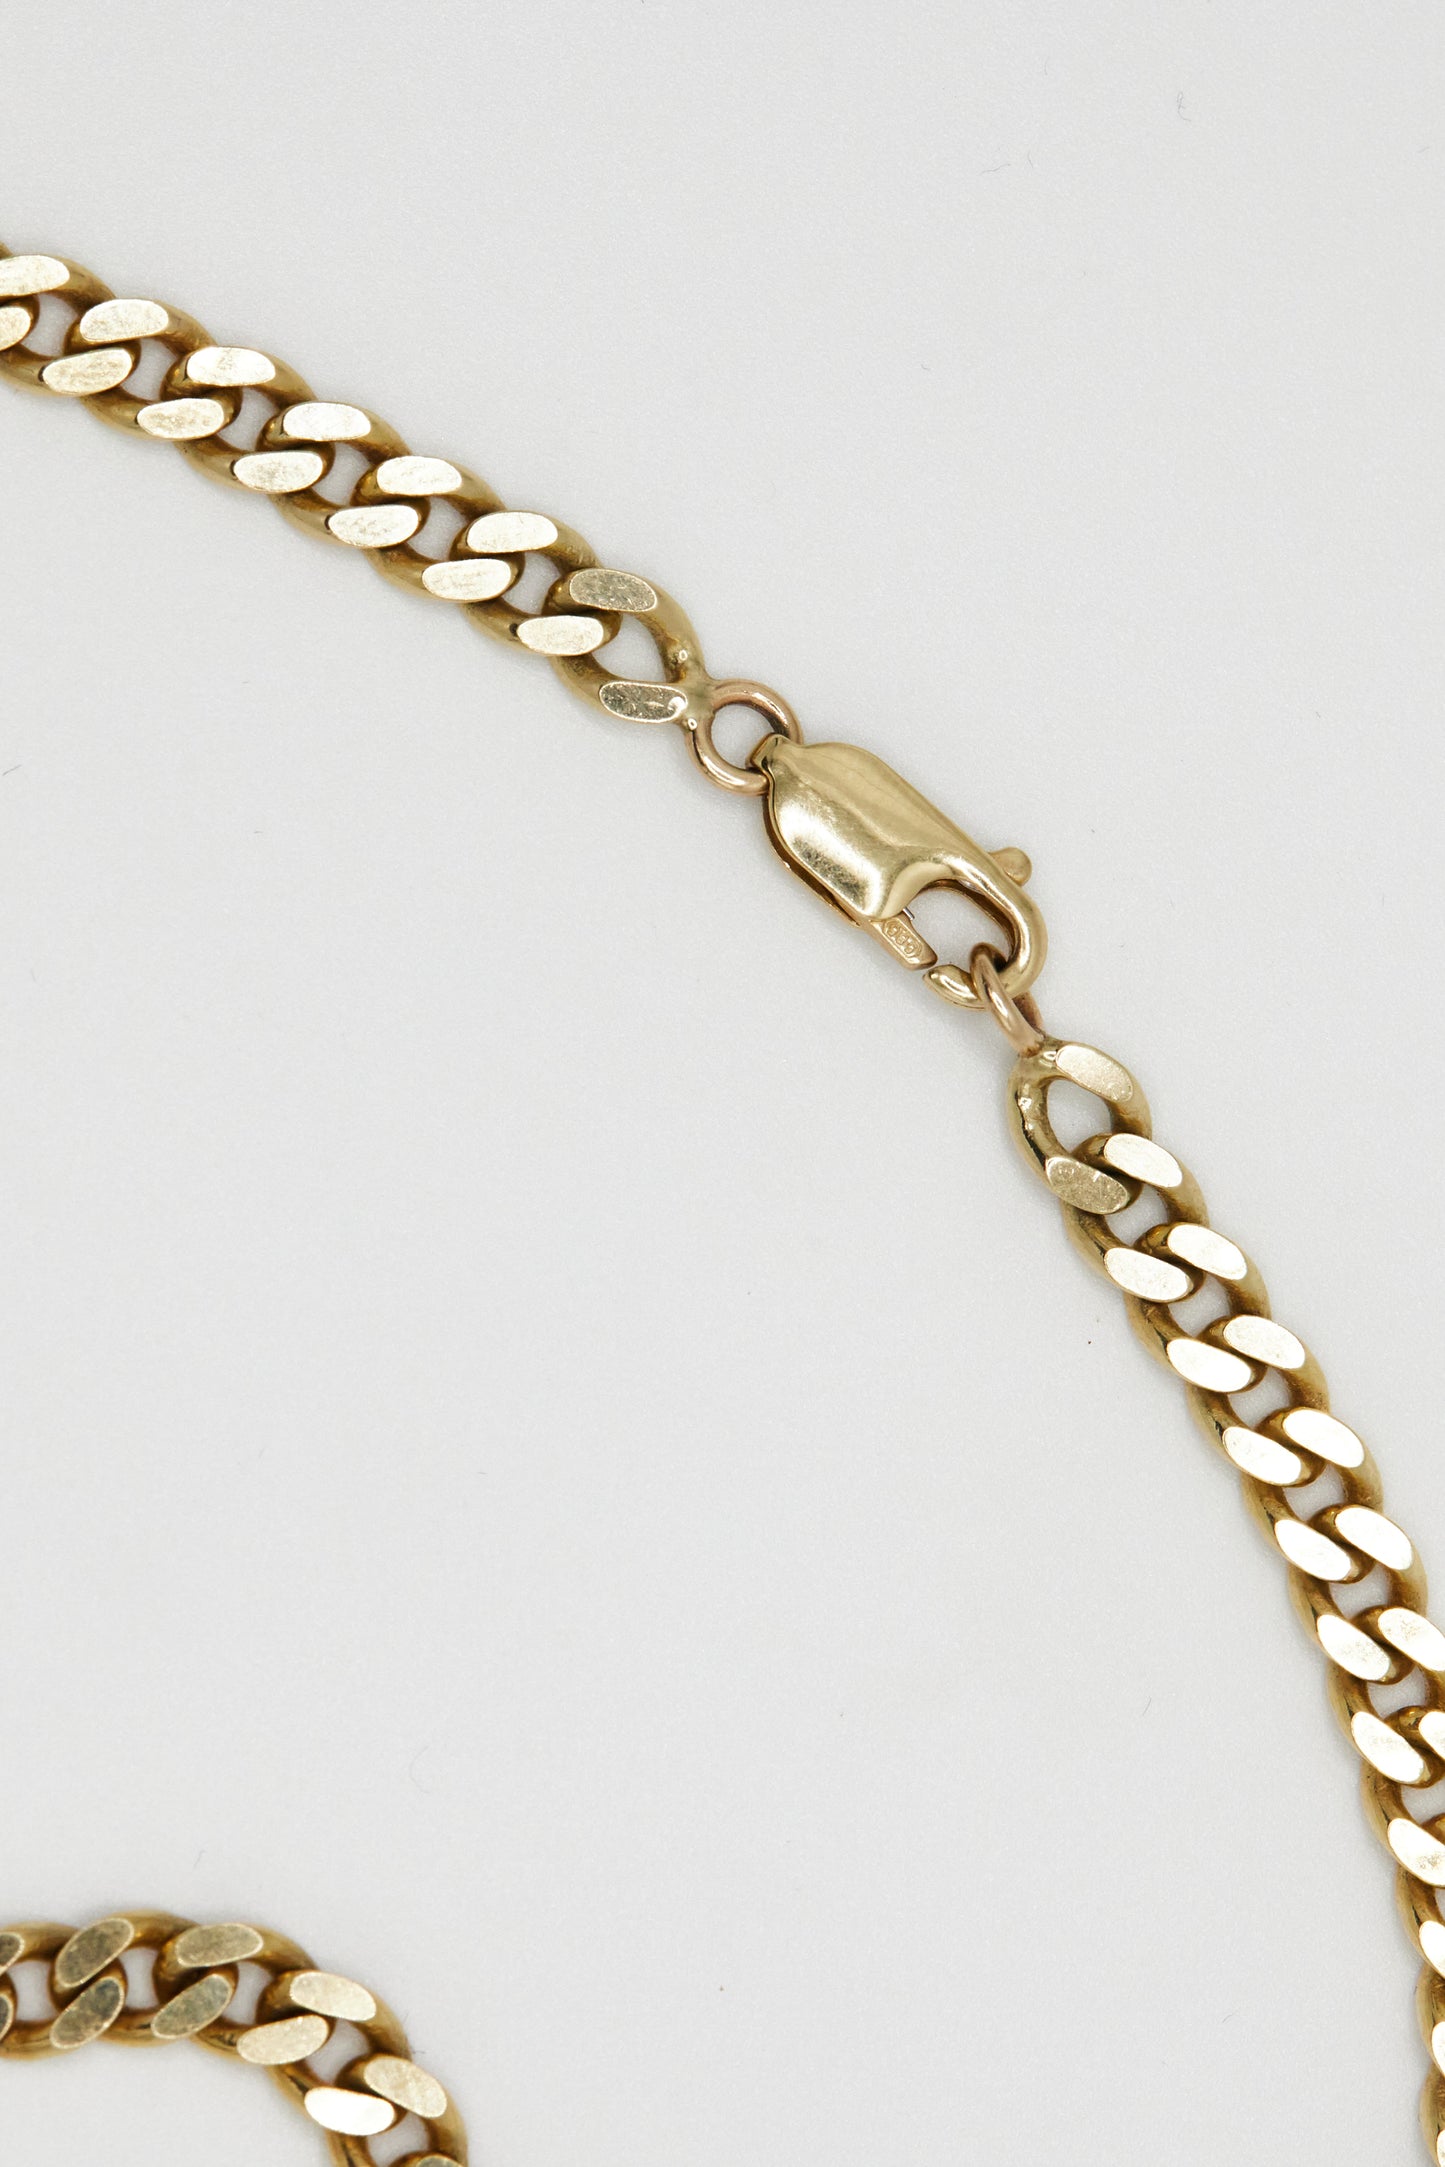 detail shot of the 14k yellow gold curb chain clasp